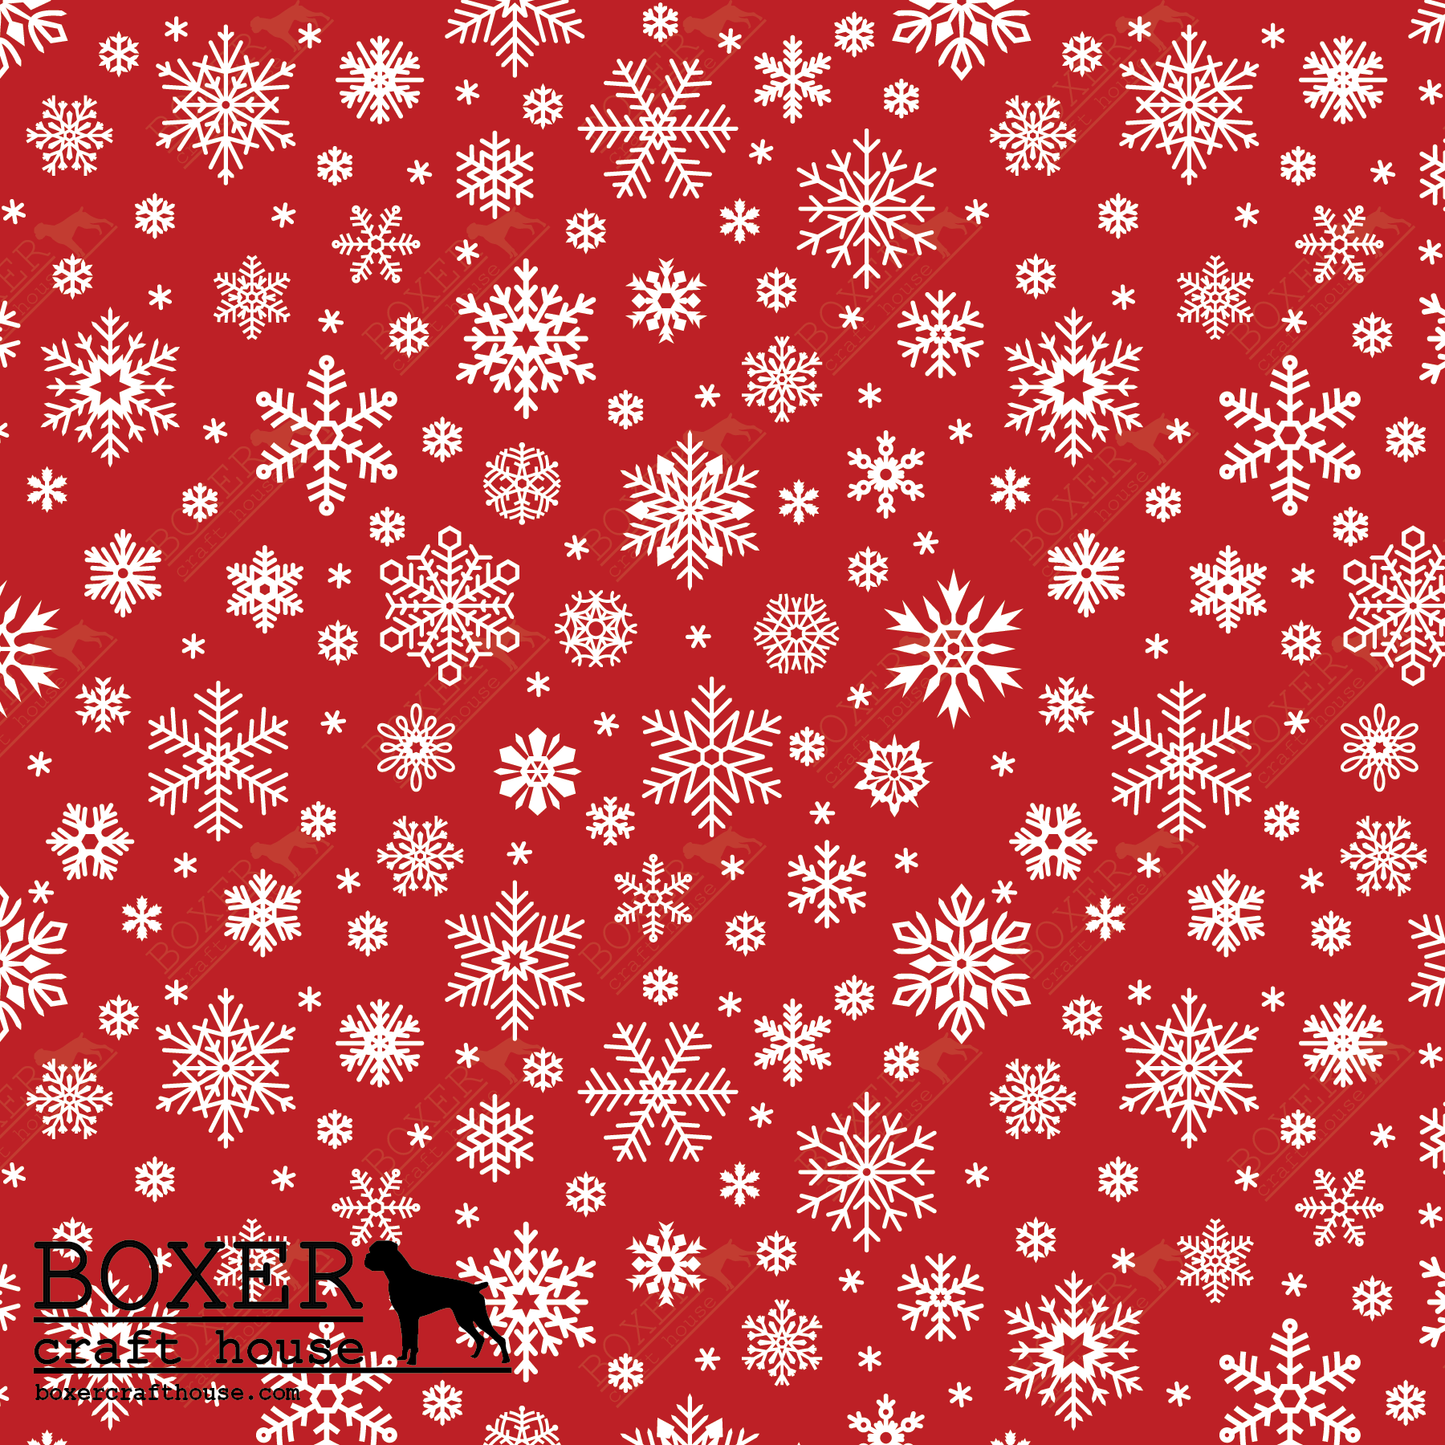 Snowflakes - Candy Apple Red